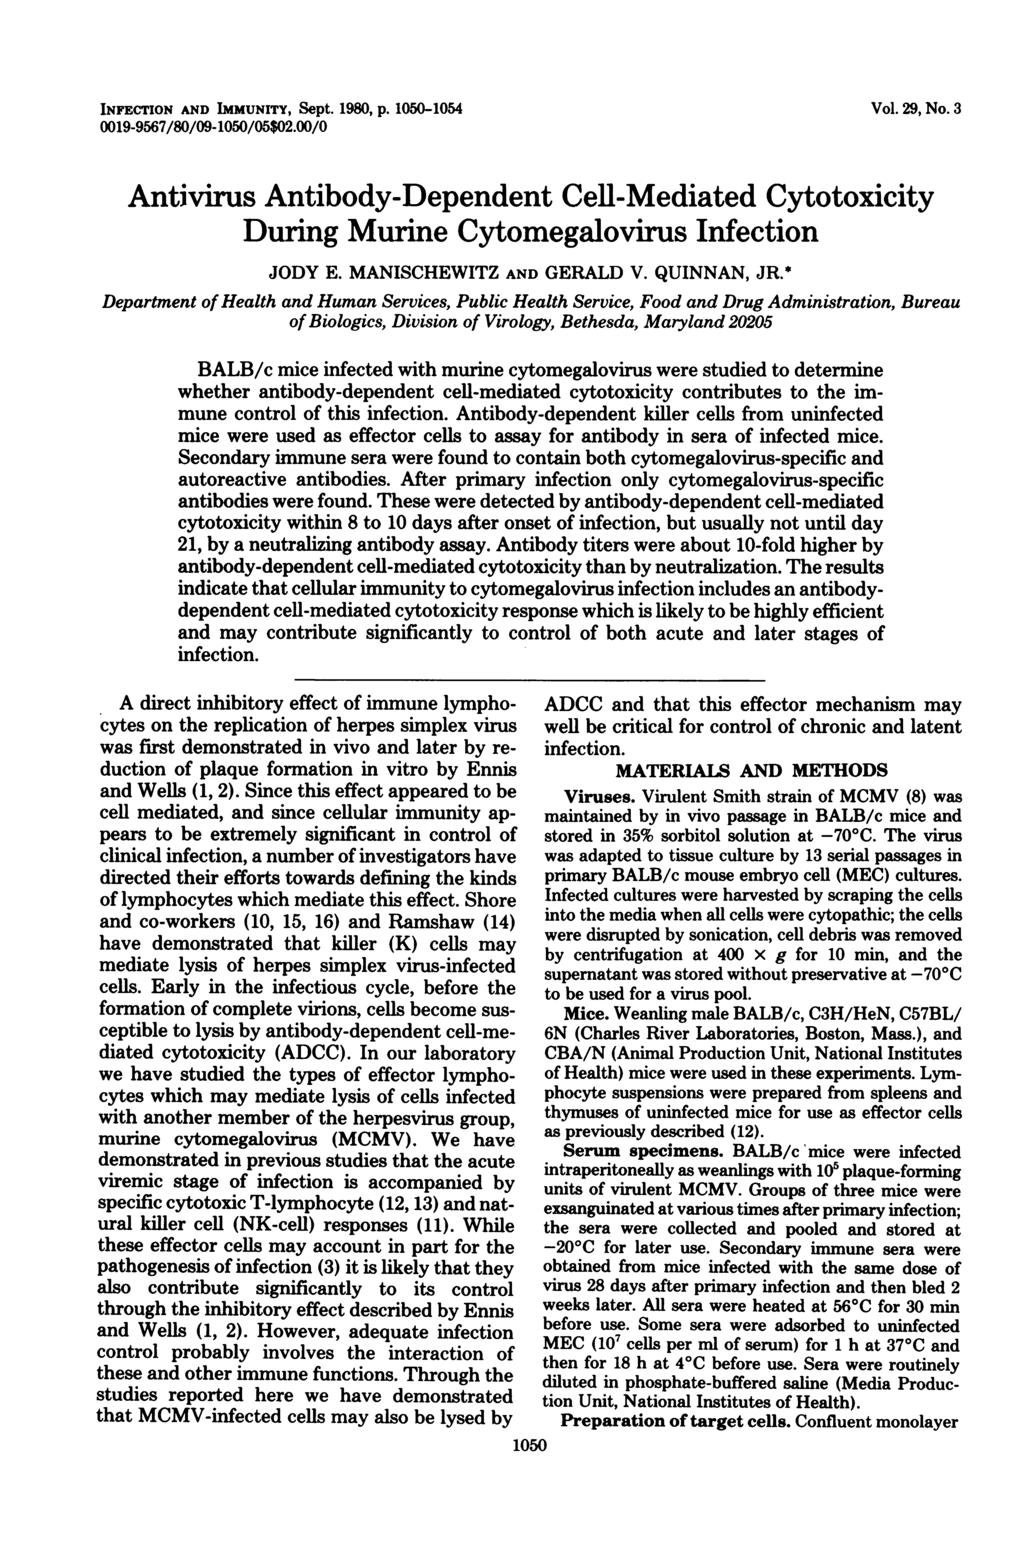 INFECTION AND IMMUNITY, Sept. 1980, p. 1050-1054 0019-9567/80/09-1050/05$02.00/0 Vol. 29, No. 3 Antivirus Antibody-Dependent Cell-Mediated Cytotoxicity During Murine Cytomegalovirus Infection JODY E.